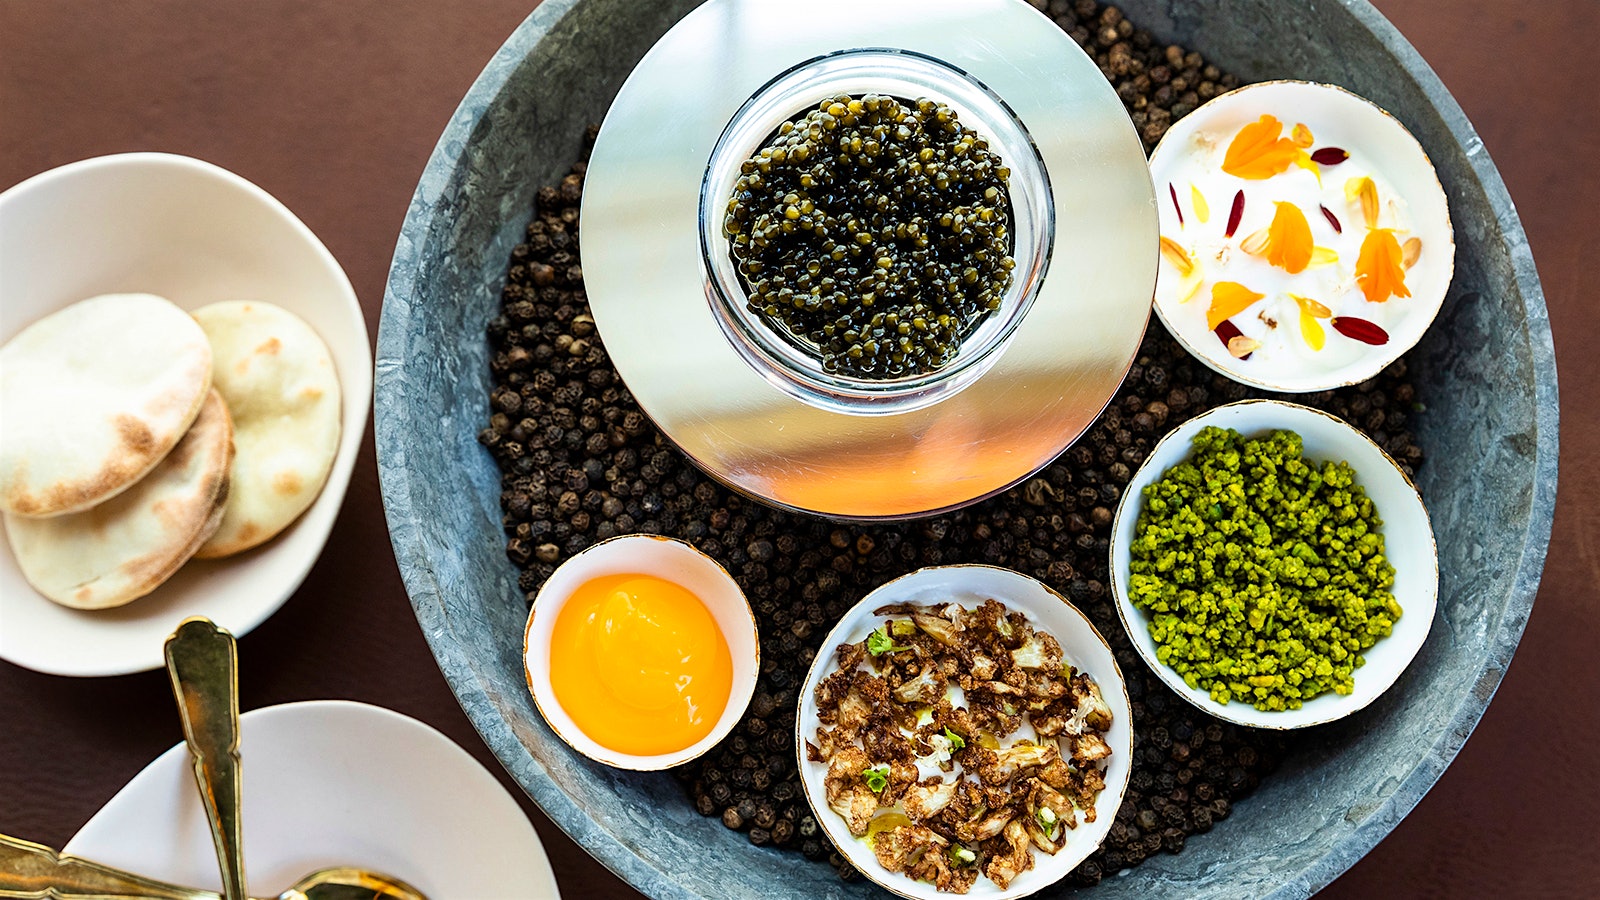  Overhead shot of caviar service at March 